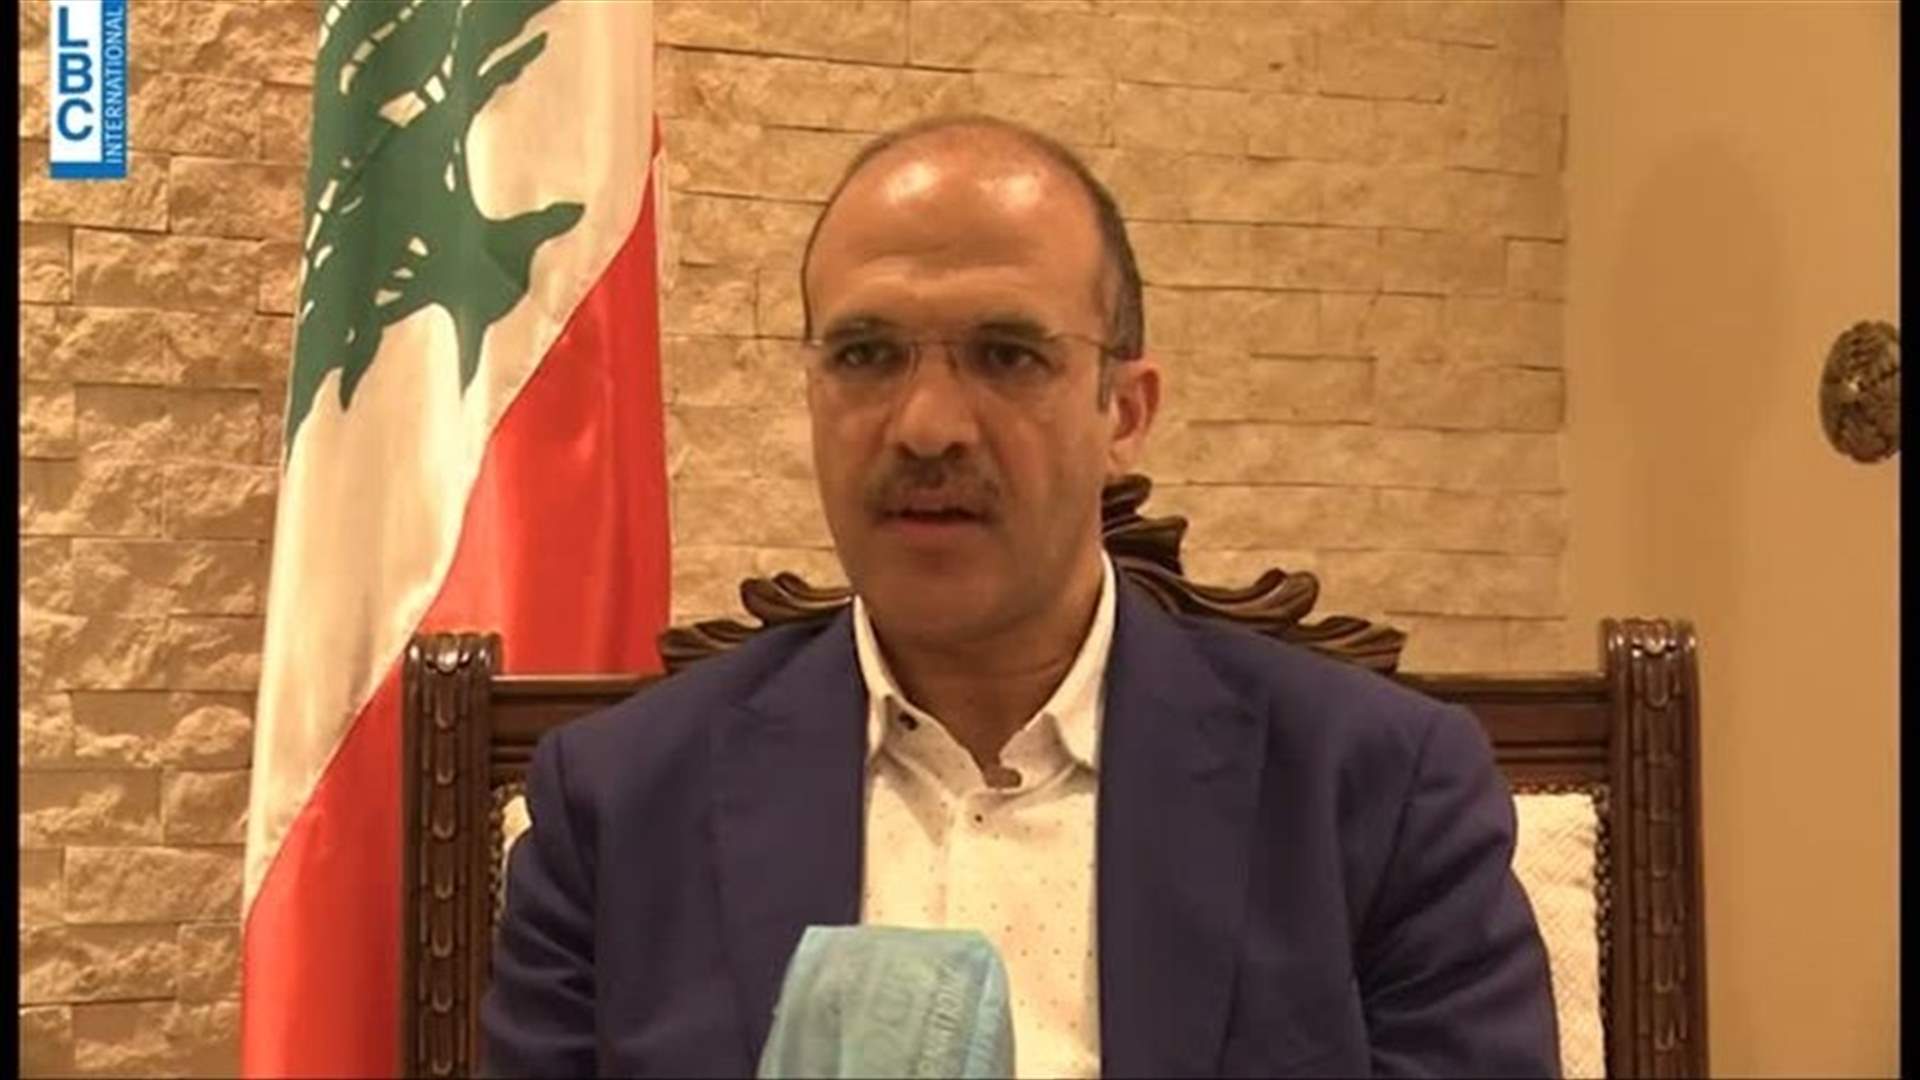 How Health Minister describes Lebanon’s current health situation&#63;